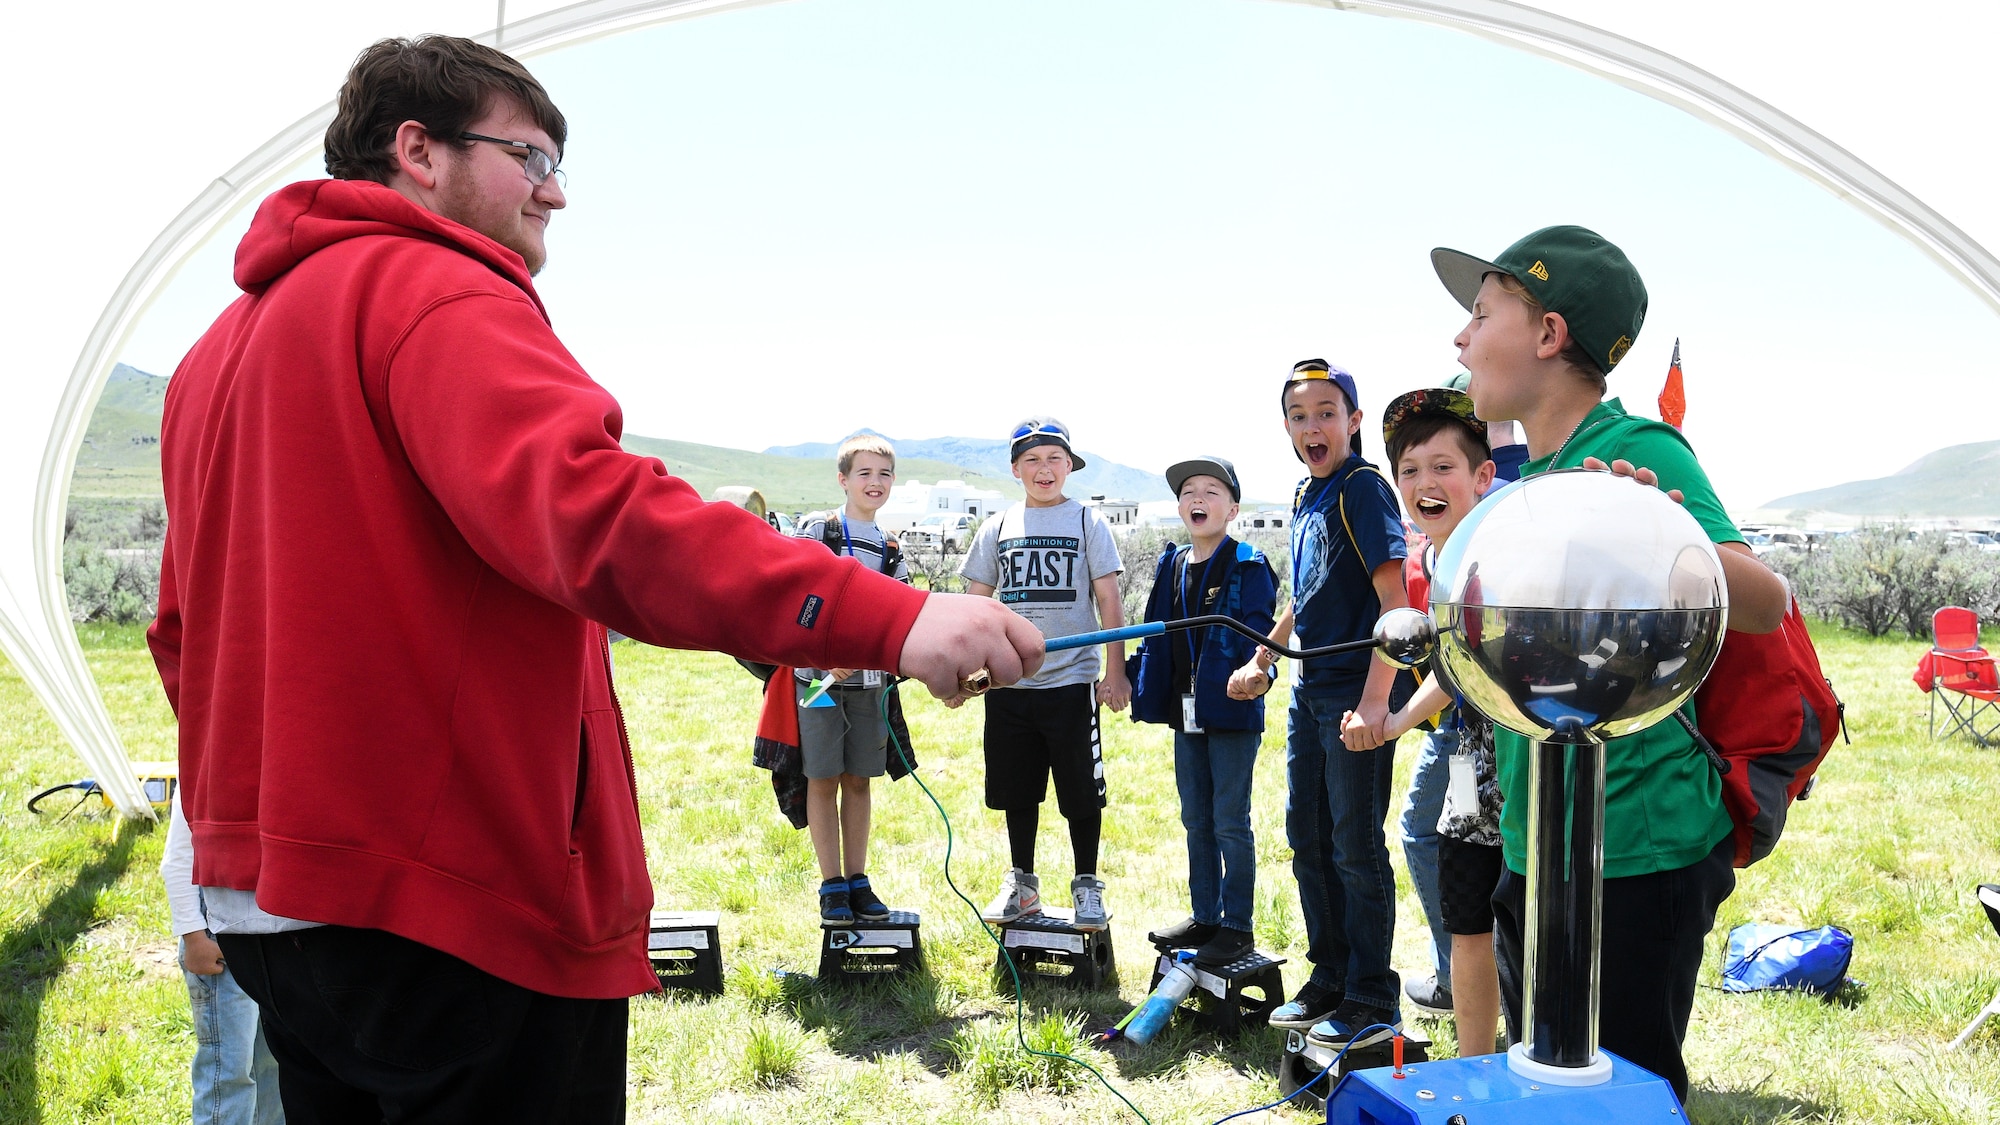 Lance Gerday demonstrates an electrostatic generator during the Golden Spike Sesquicentennial Celebration May 10, 2019, at Promontory Summit, Utah. Event festivities included an “Innovation Summit” that focused on STEM-related activities hosted by Hill Air Force Base, industry, and secondary and higher education. (U.S. Air Force photo by R. Nial Bradshaw)